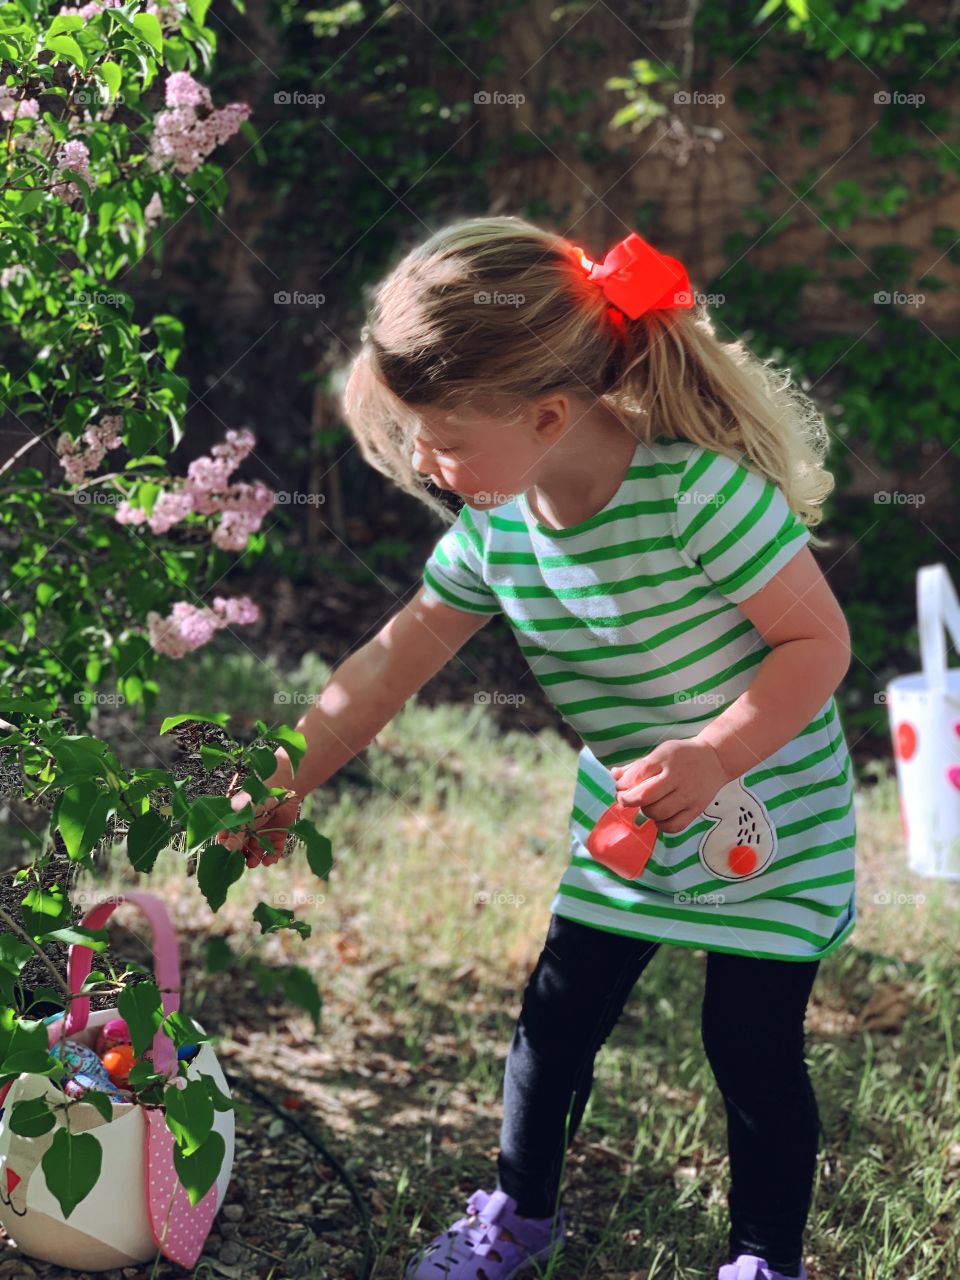 A real live action photo of a precious little girl on a journey to find Easter Eggs on Easter Sunday Morning. 